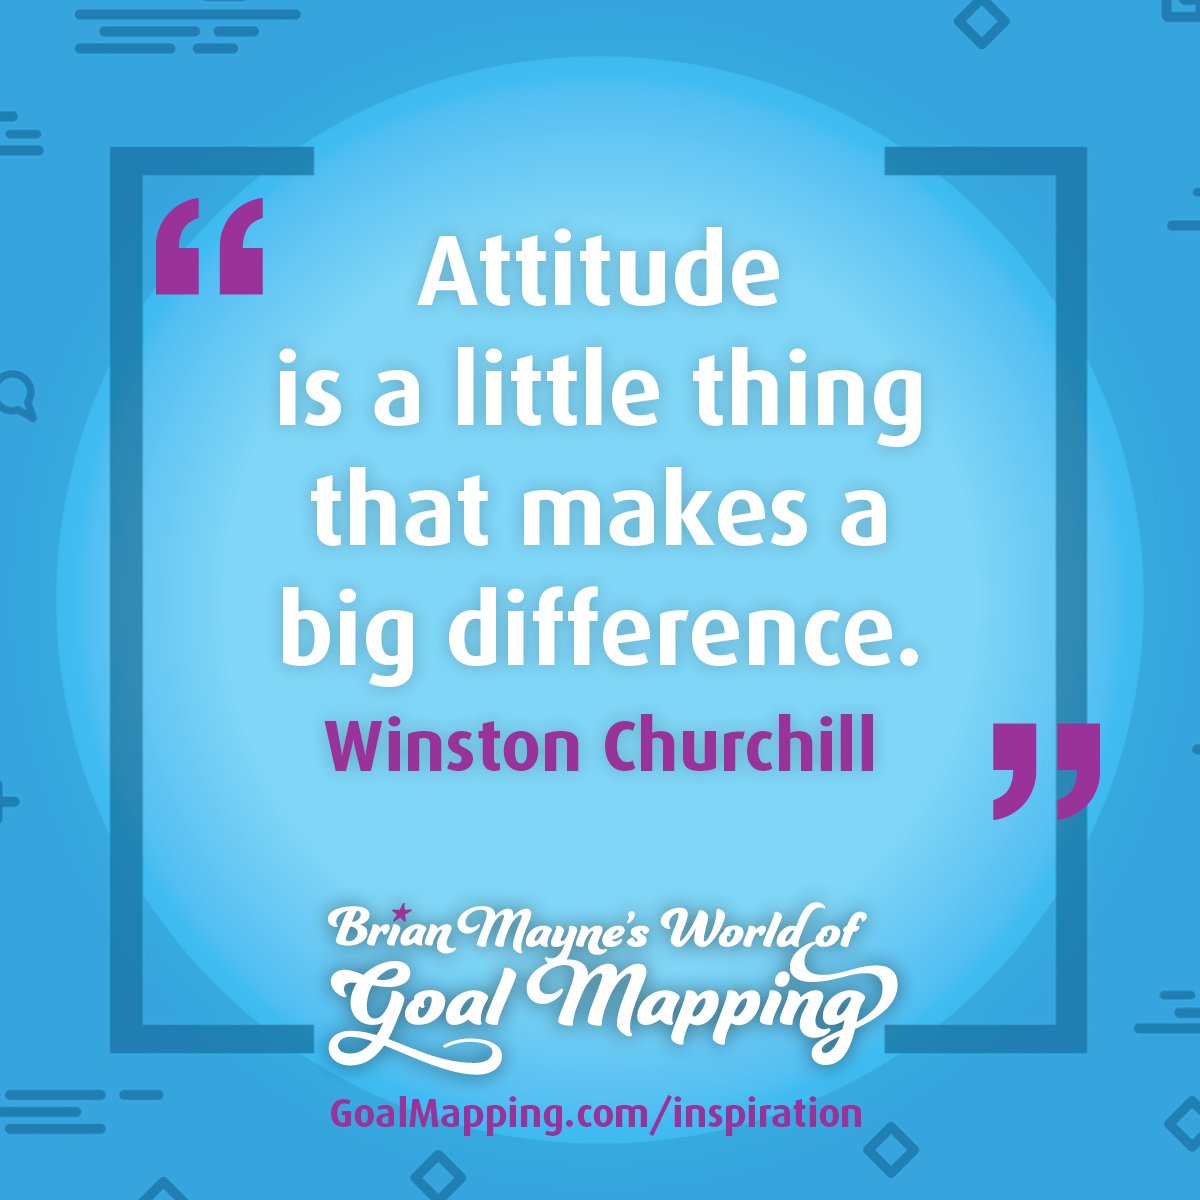 "Attitude is a little thing that makes a big difference." Winston Churchill